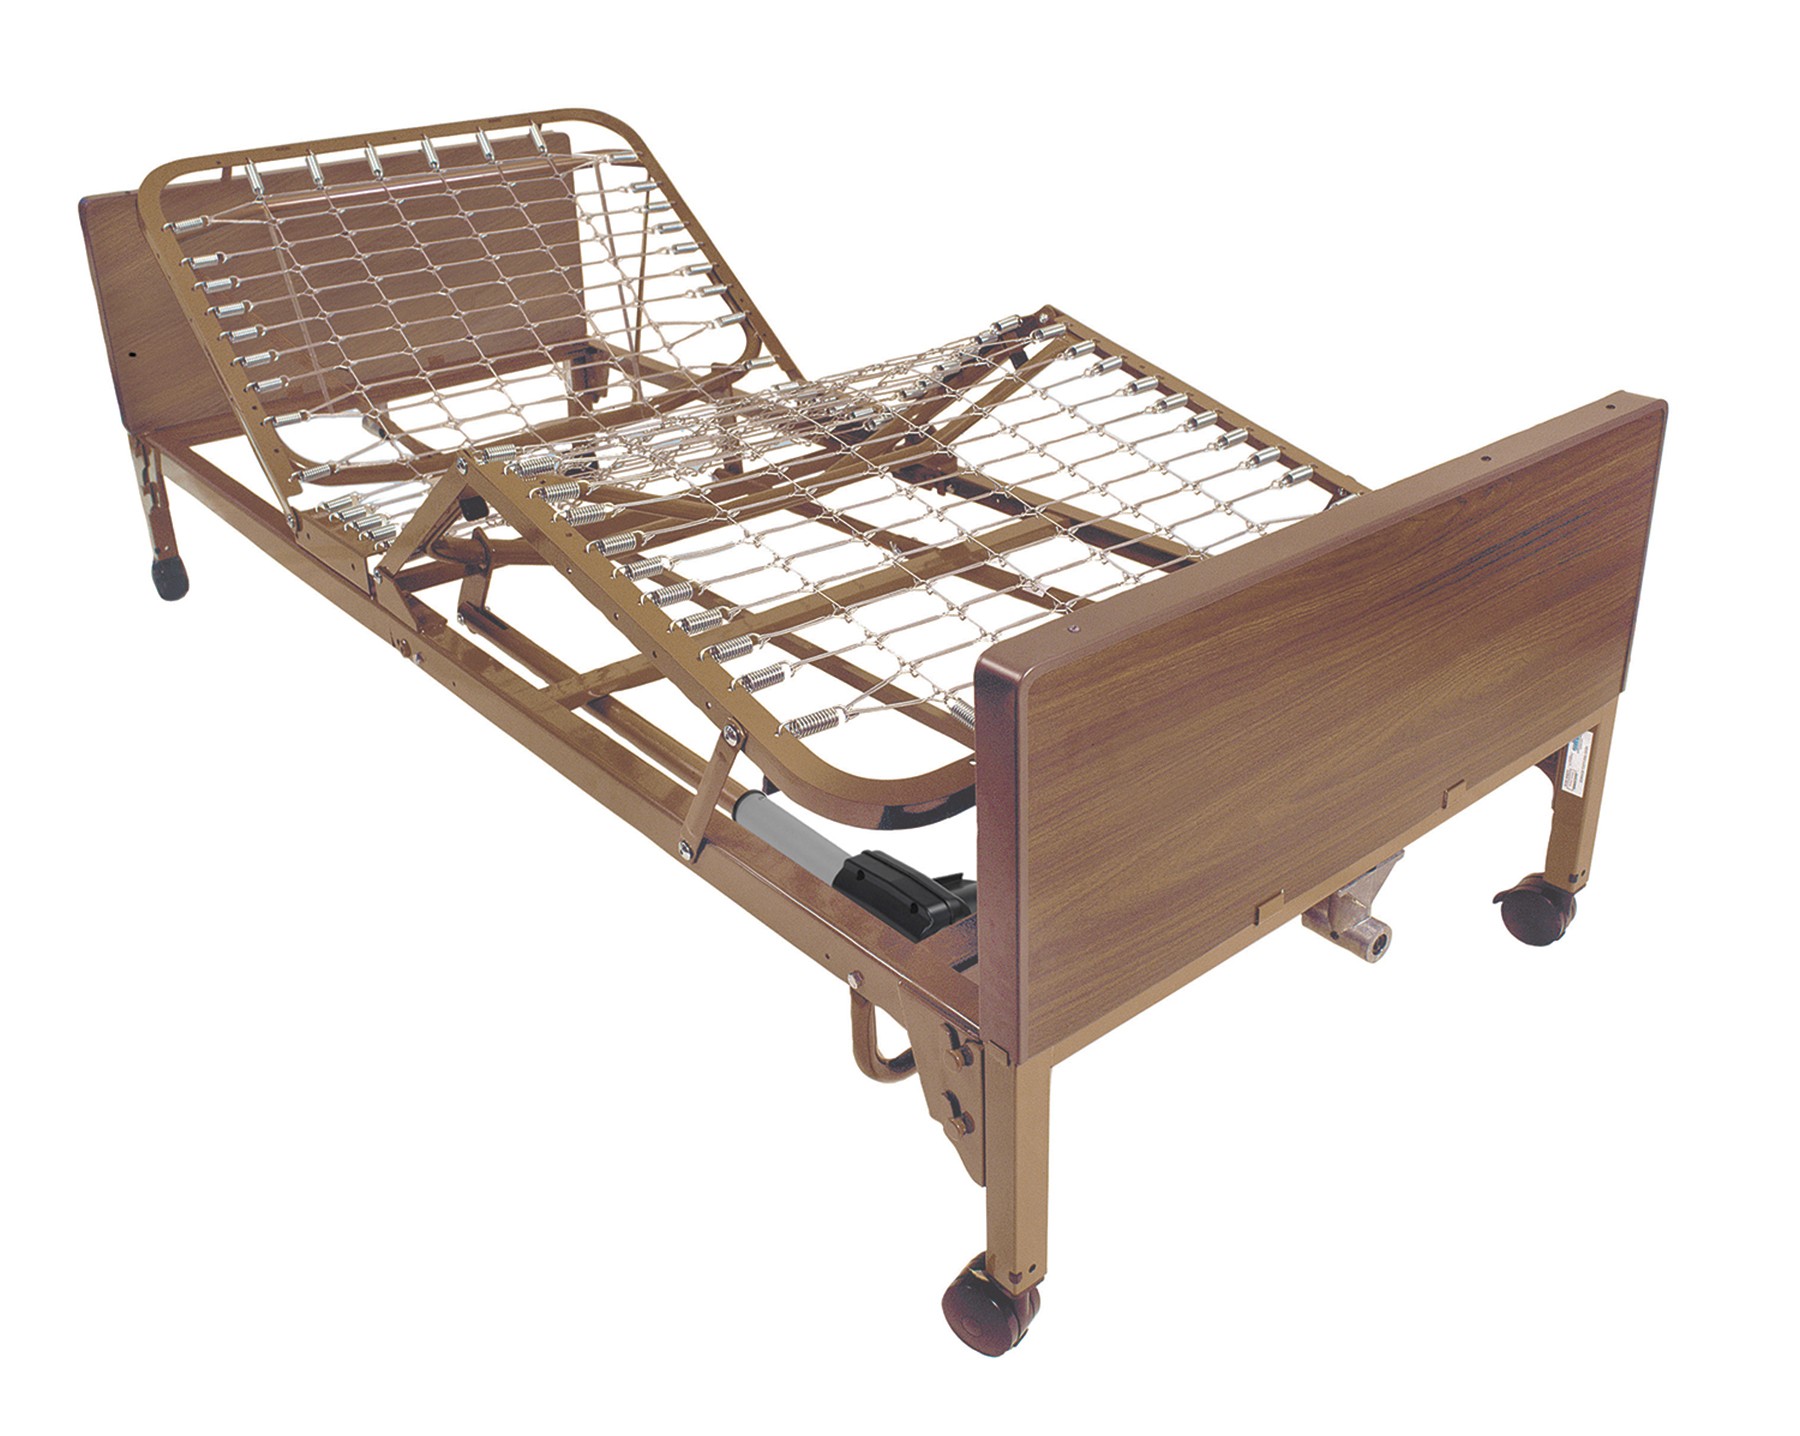 San Diego inexpensive Electric Hospital Beds cheap discount sale price